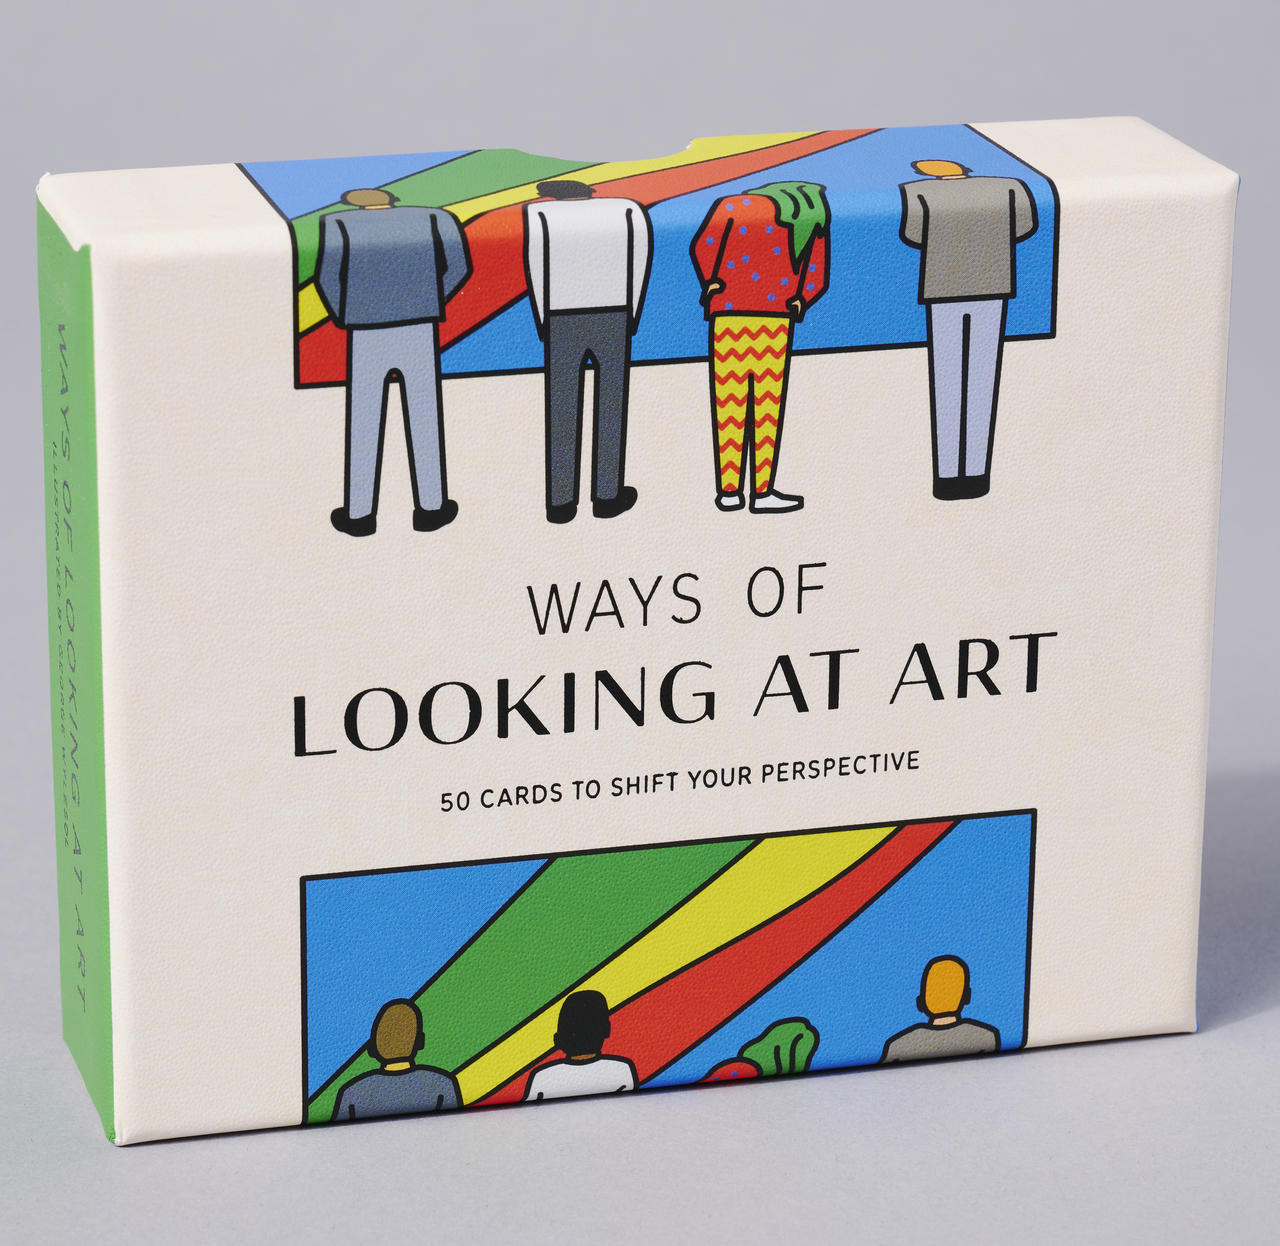 Ways Of Looking At Art: 50 Cards to Shift Your Perspective